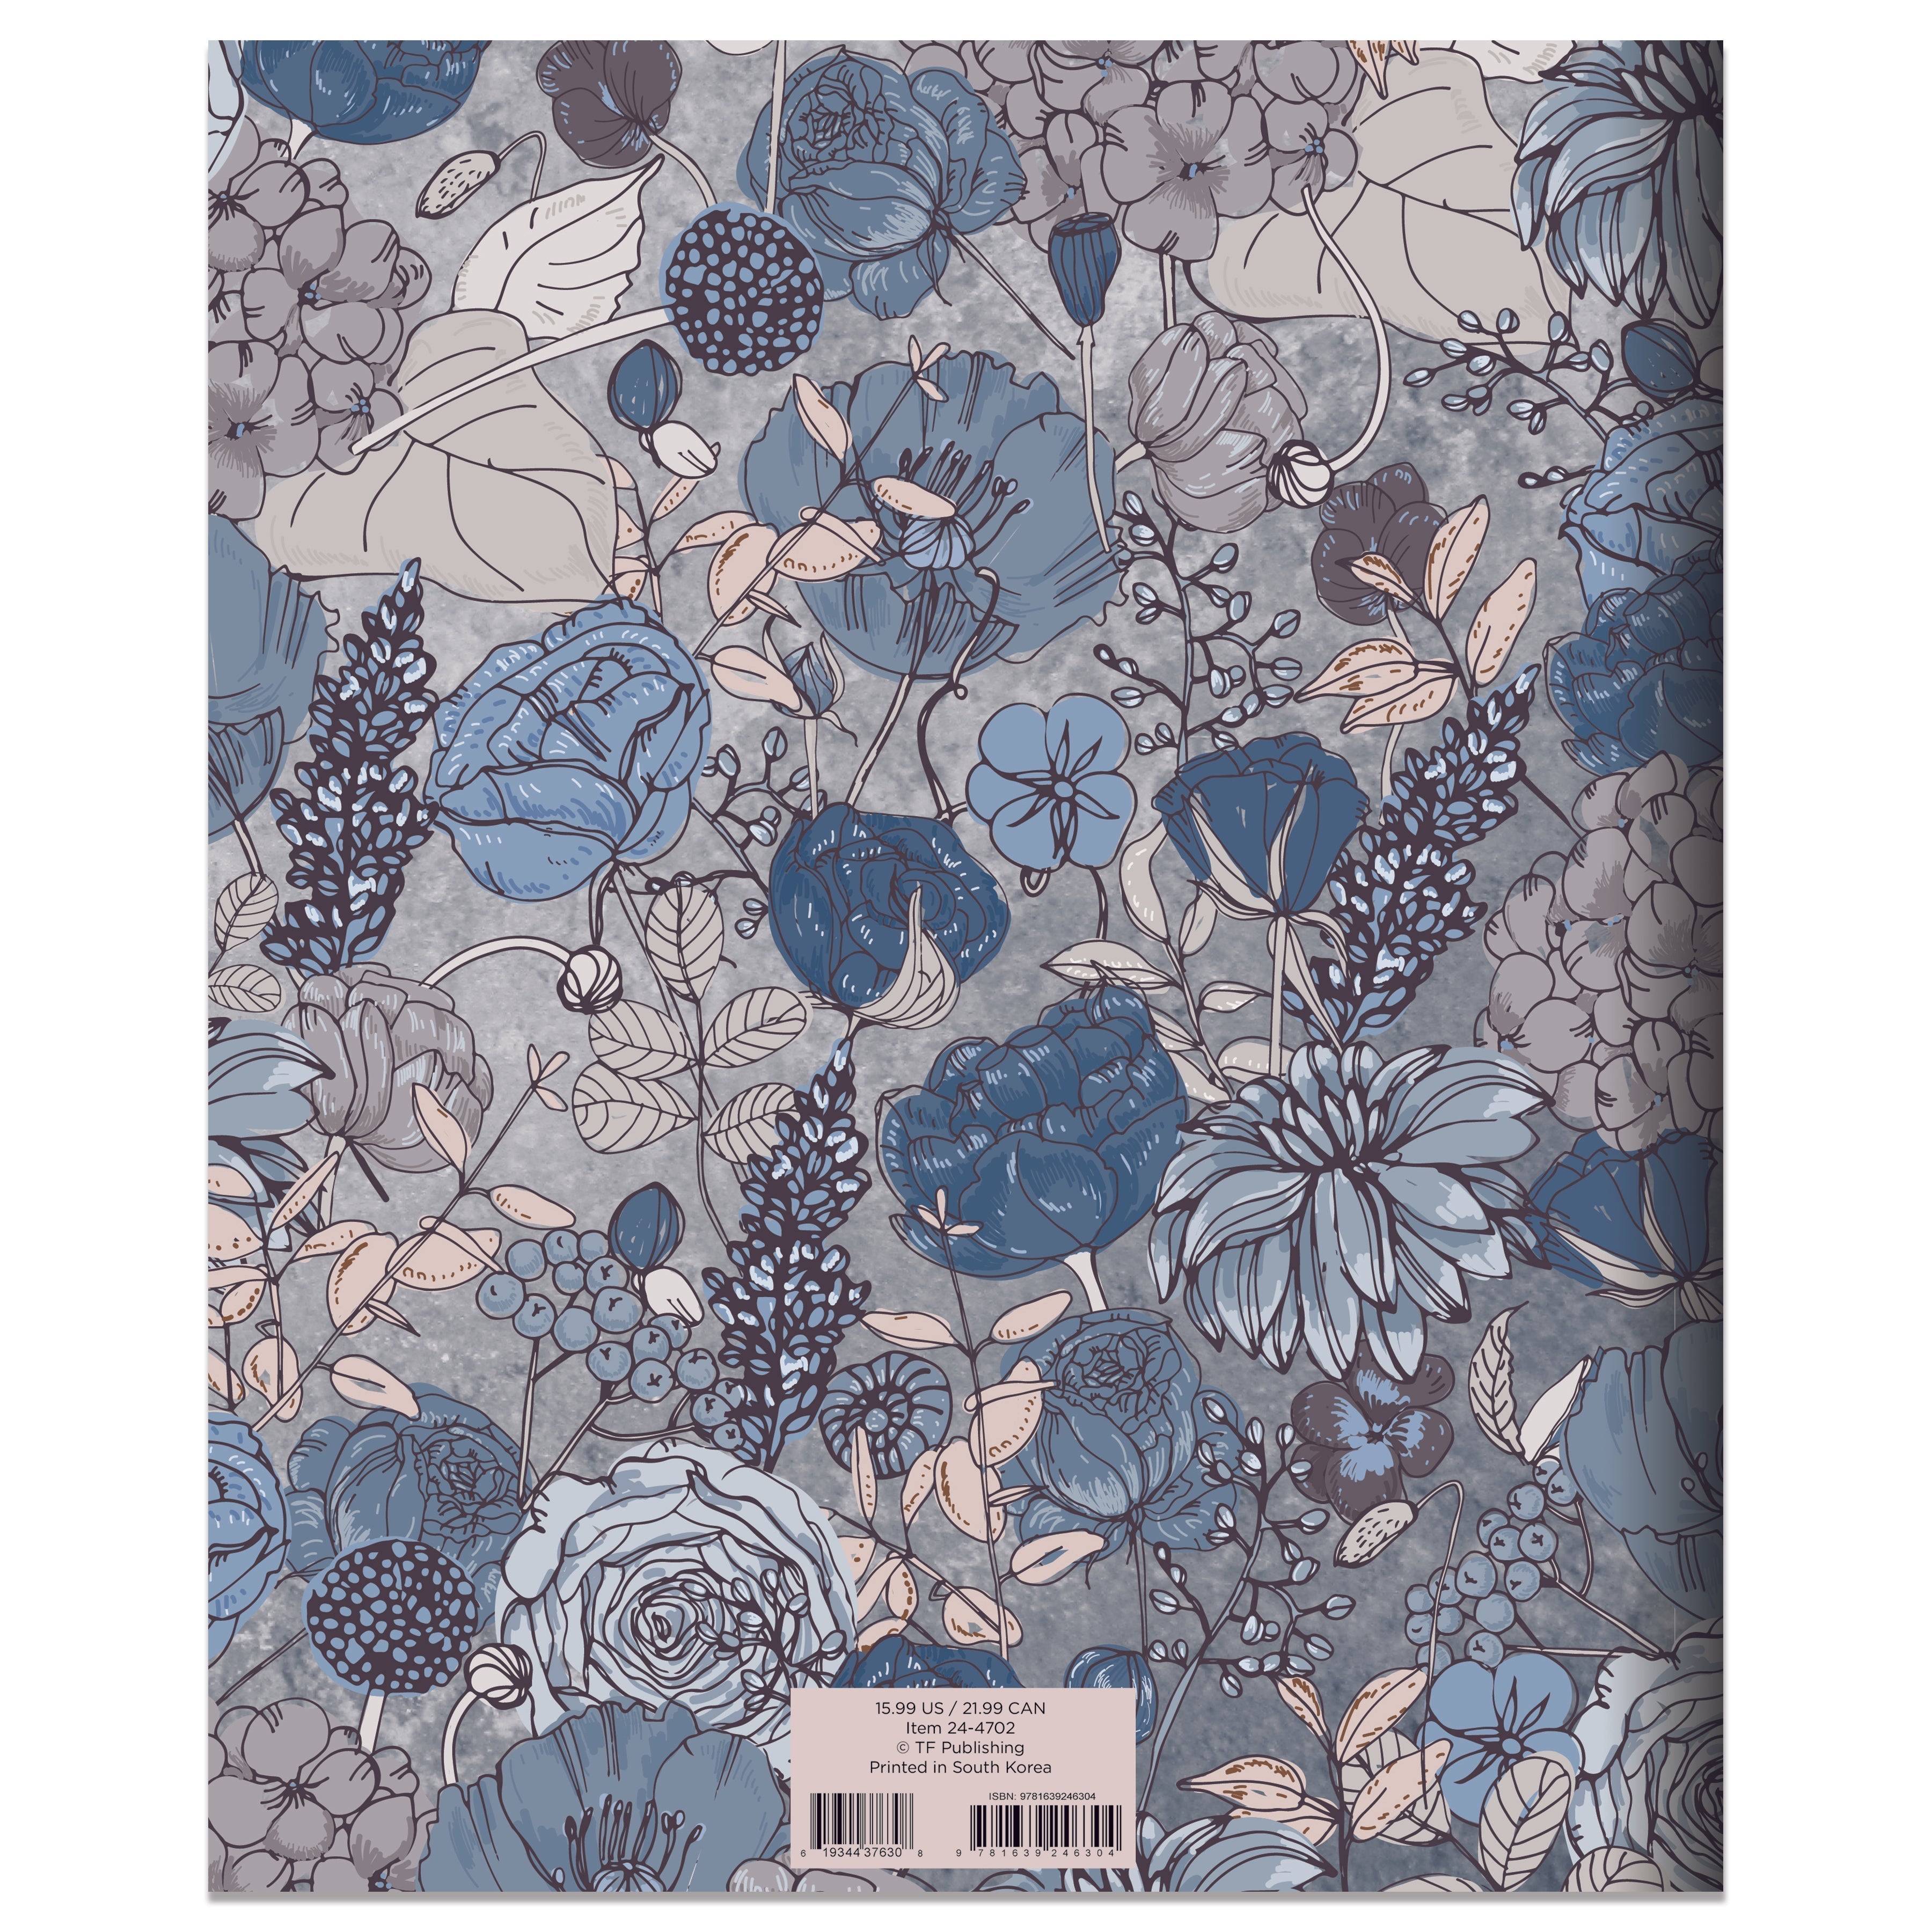 2024 Blooms of Blue - Large Monthly Diary/Planner